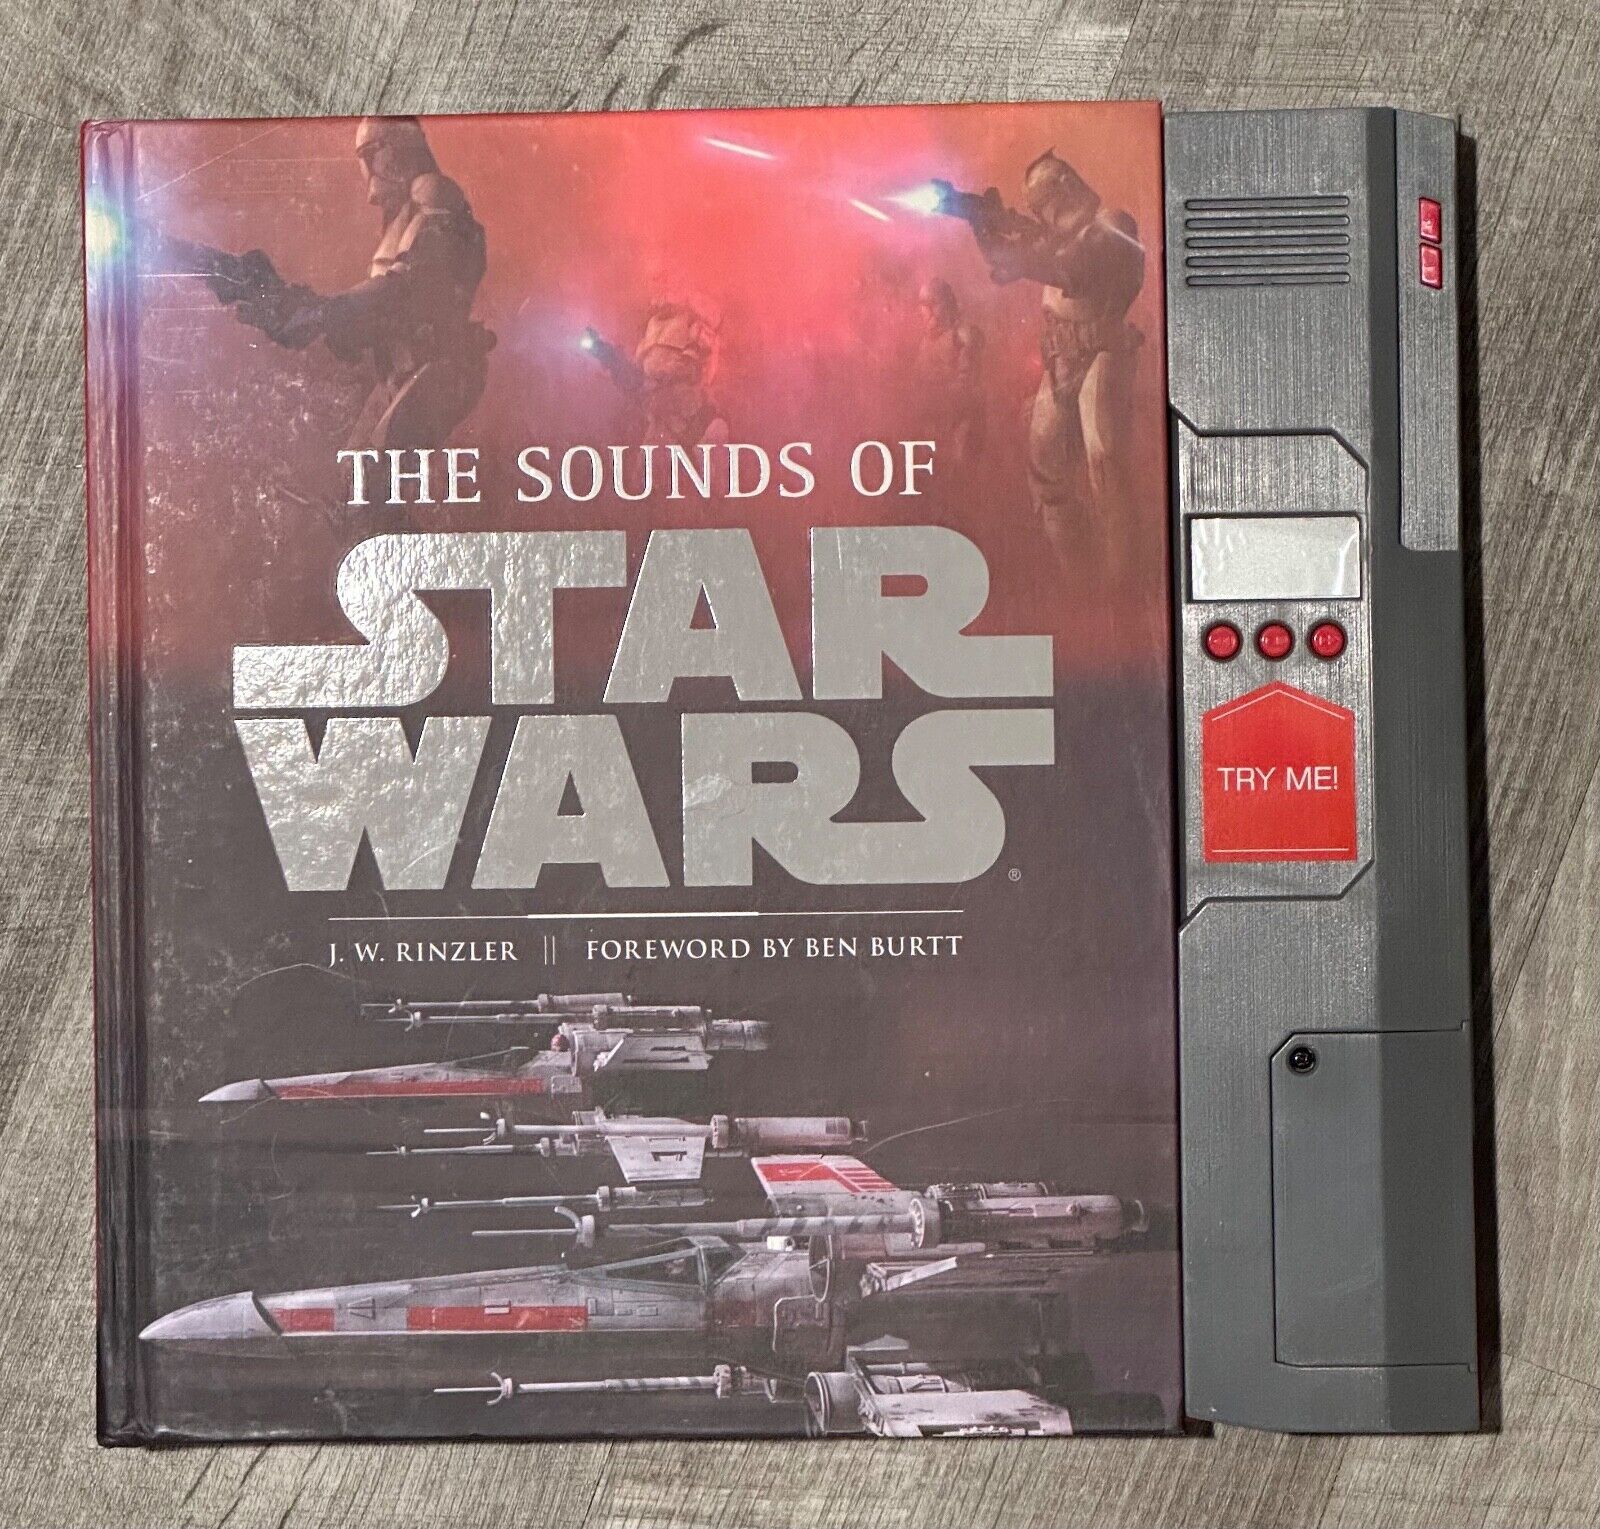 RARE FIND THE SOUNDS OF STAR WARS 2010 INTERACTIVE EDITION